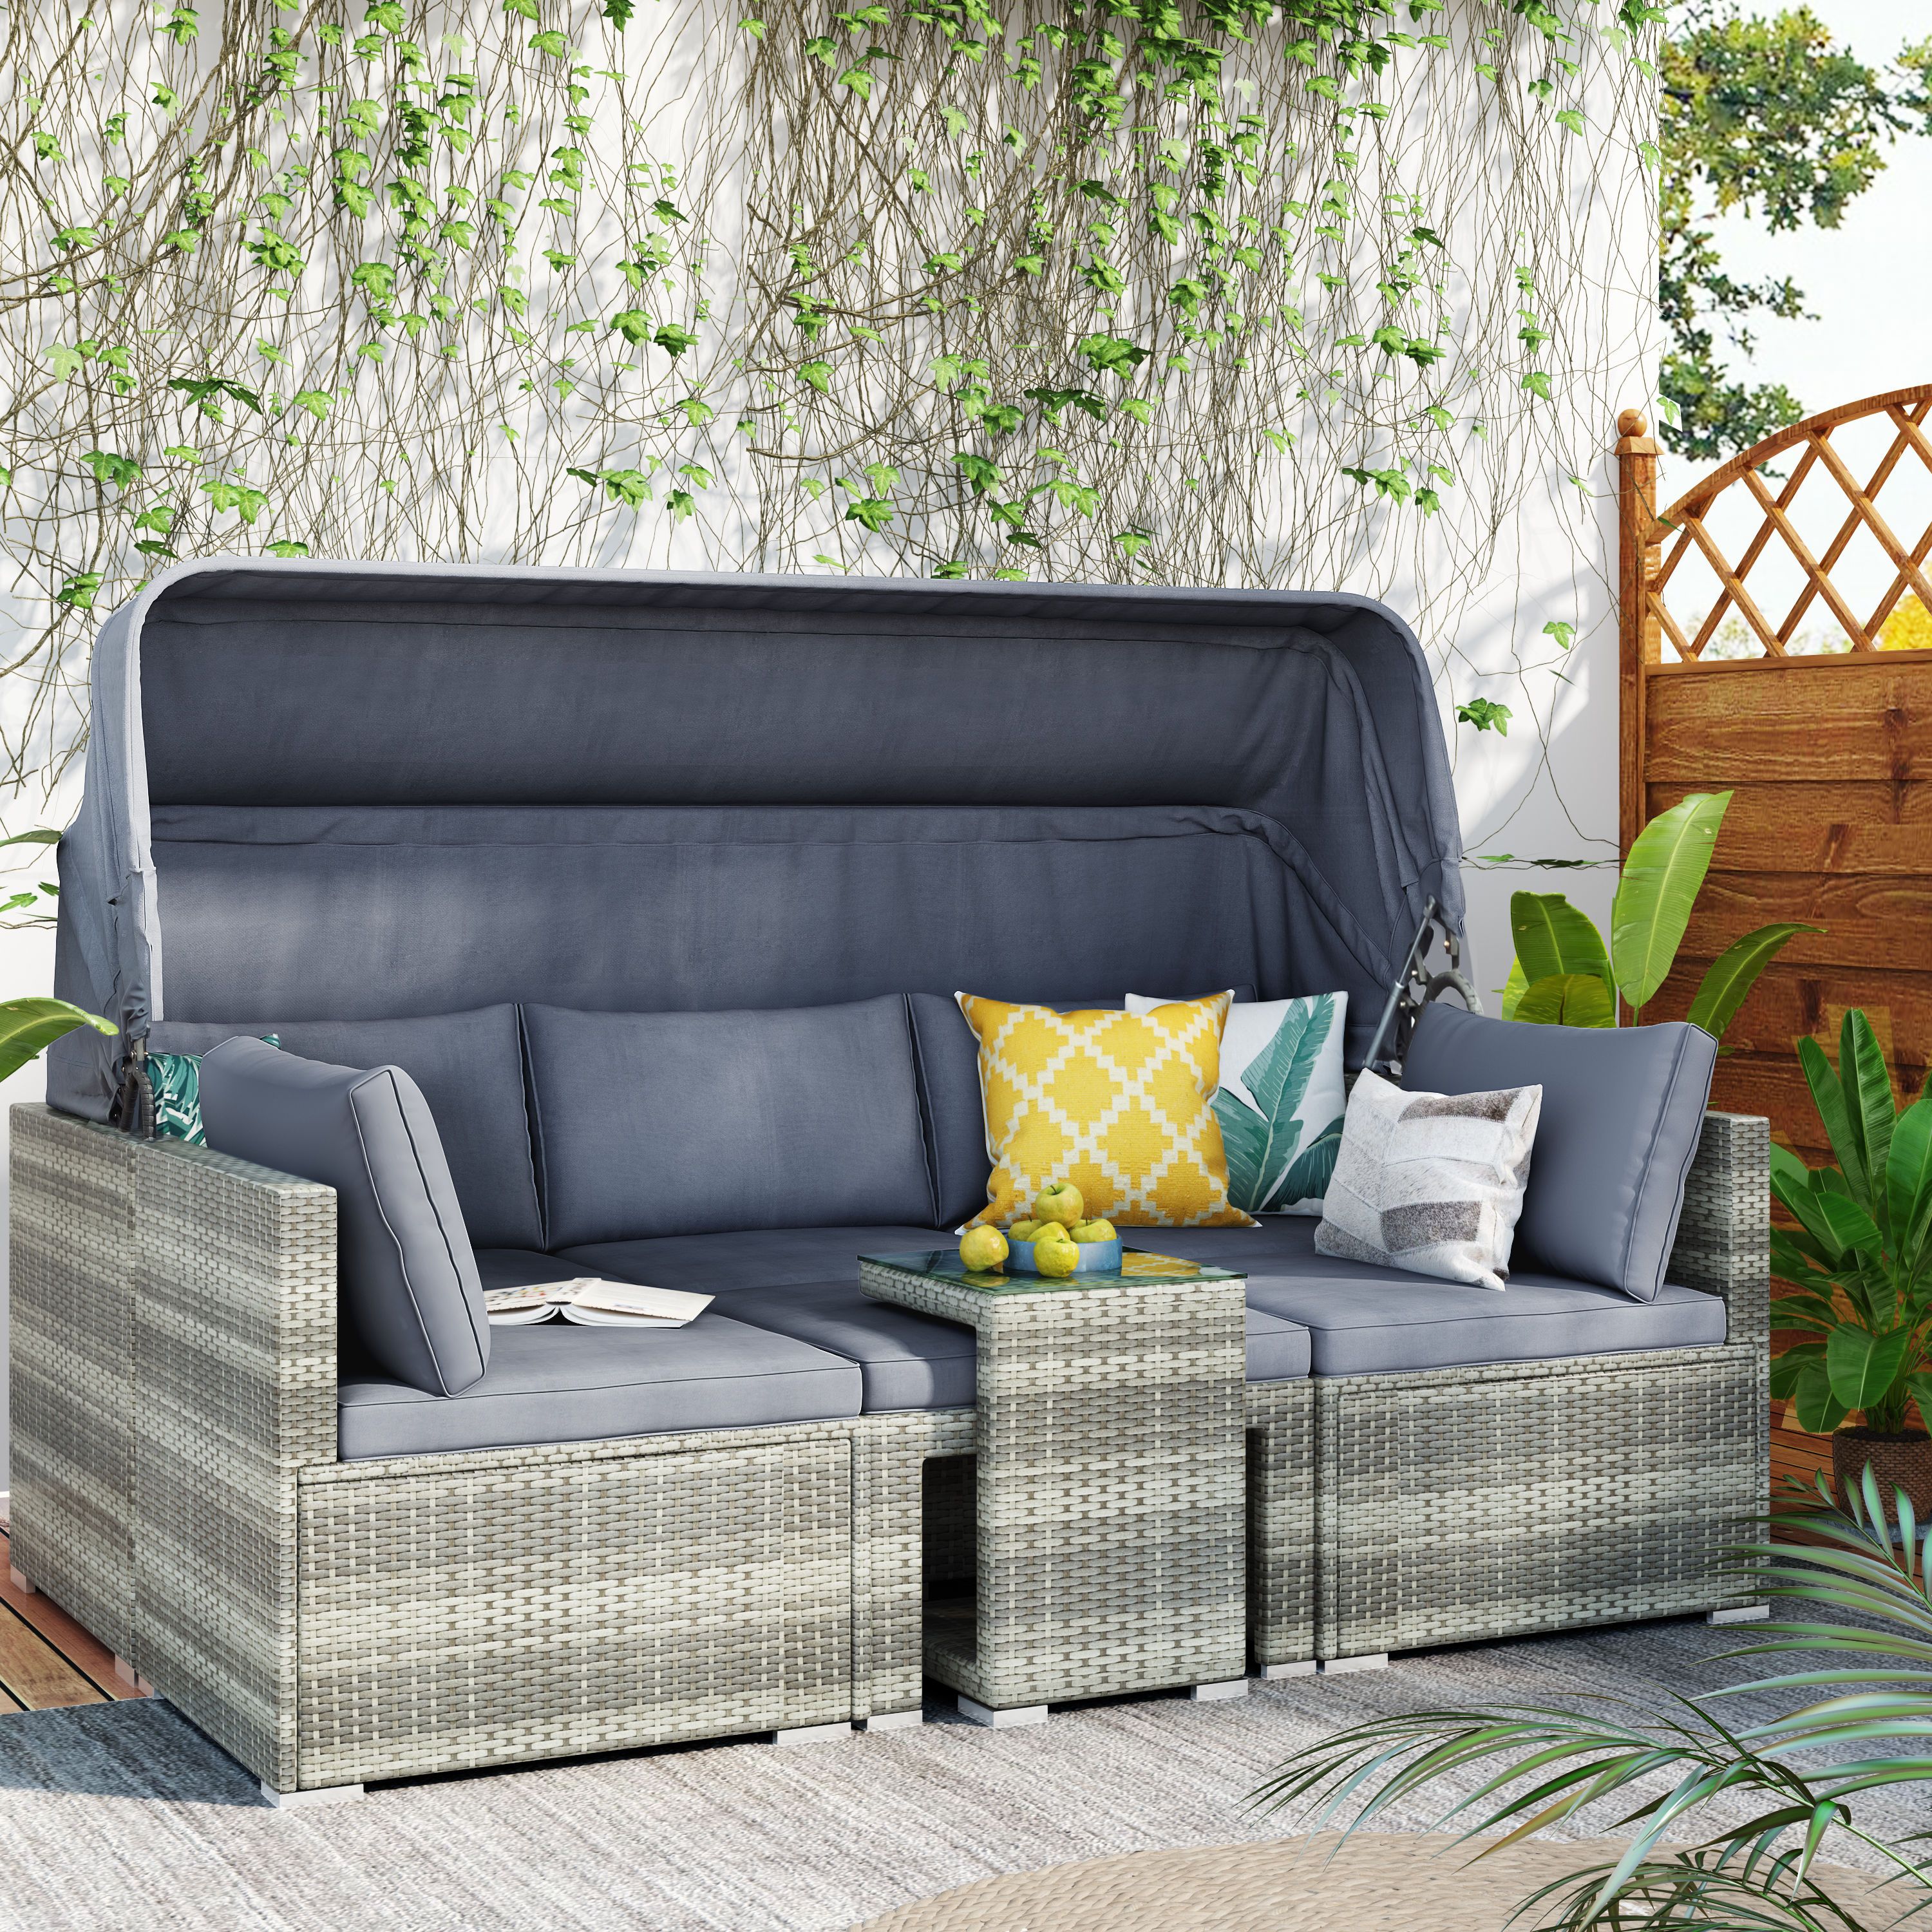 Trendy Clihome 5 Piece Sectional Set 4 Piece Rattan Patio Conversation Set With  Gray Cushions In The Patio Conversation Sets Department At Lowes With Regard To All Weather Rattan Conversation Set (View 9 of 15)